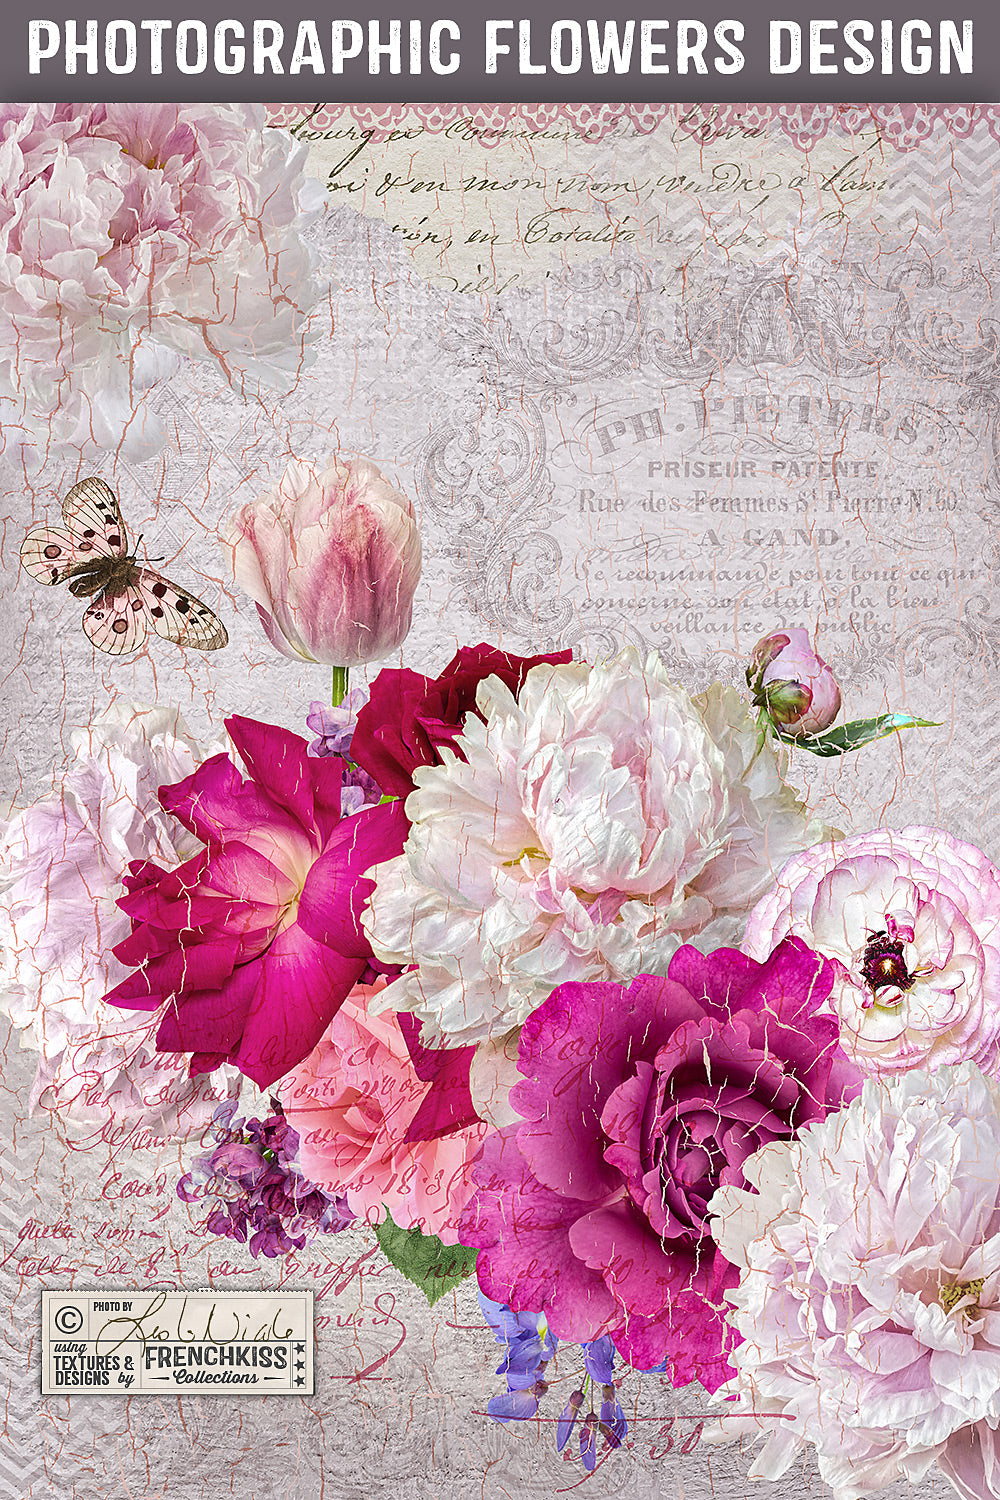 Design using photographic flowers, vintage French, textures, and grunge.